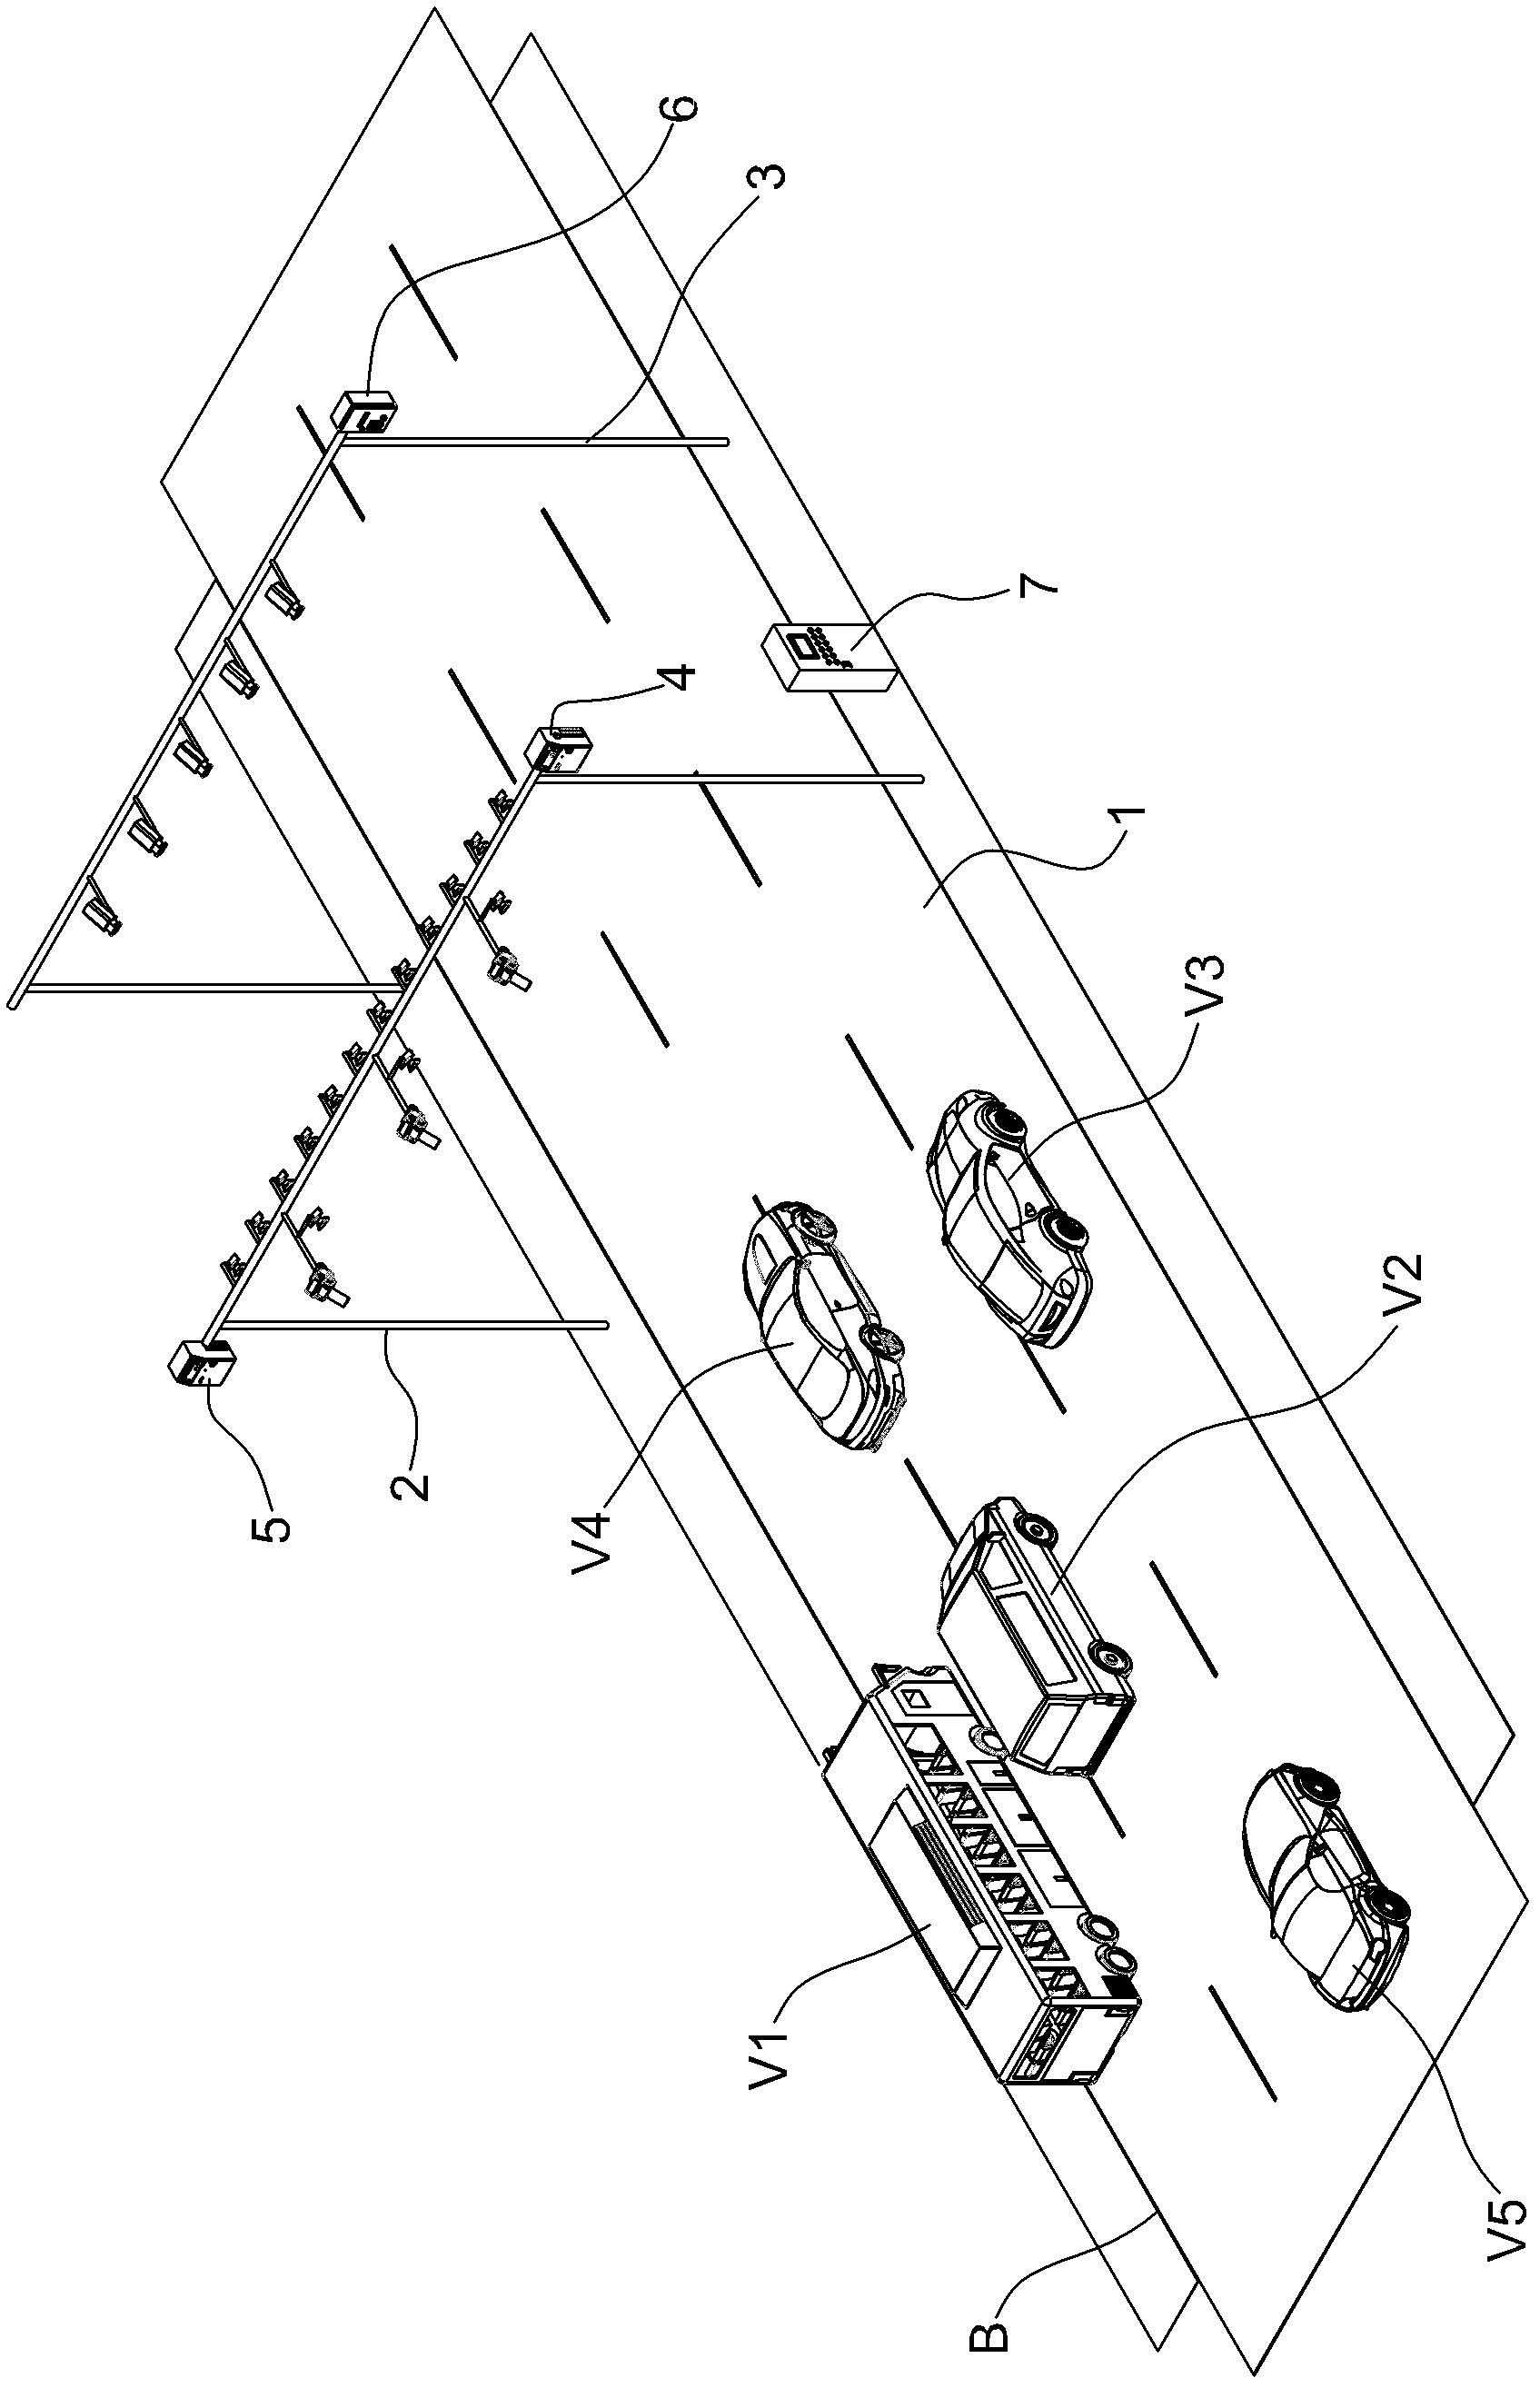 Multilane free-flow electronic toll collection method based on accurate position match